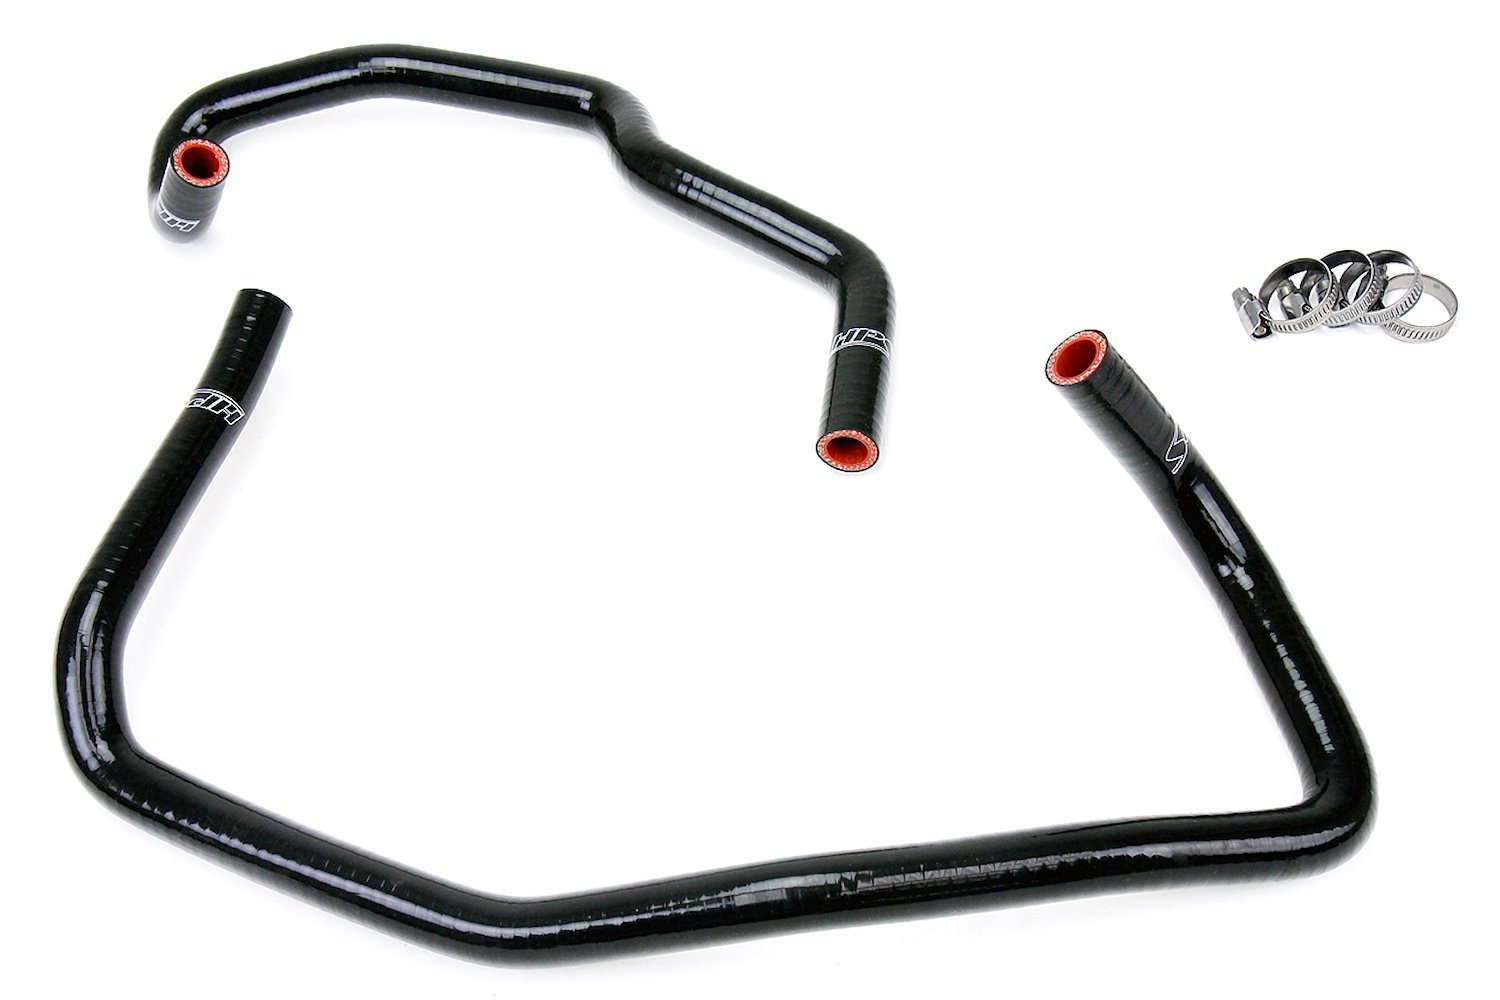 57-1468-BLK Heater Hose Kit, High-Temp 3-Ply Reinforced Silicone, Replace OEM Rubber Heater Coolant Hoses